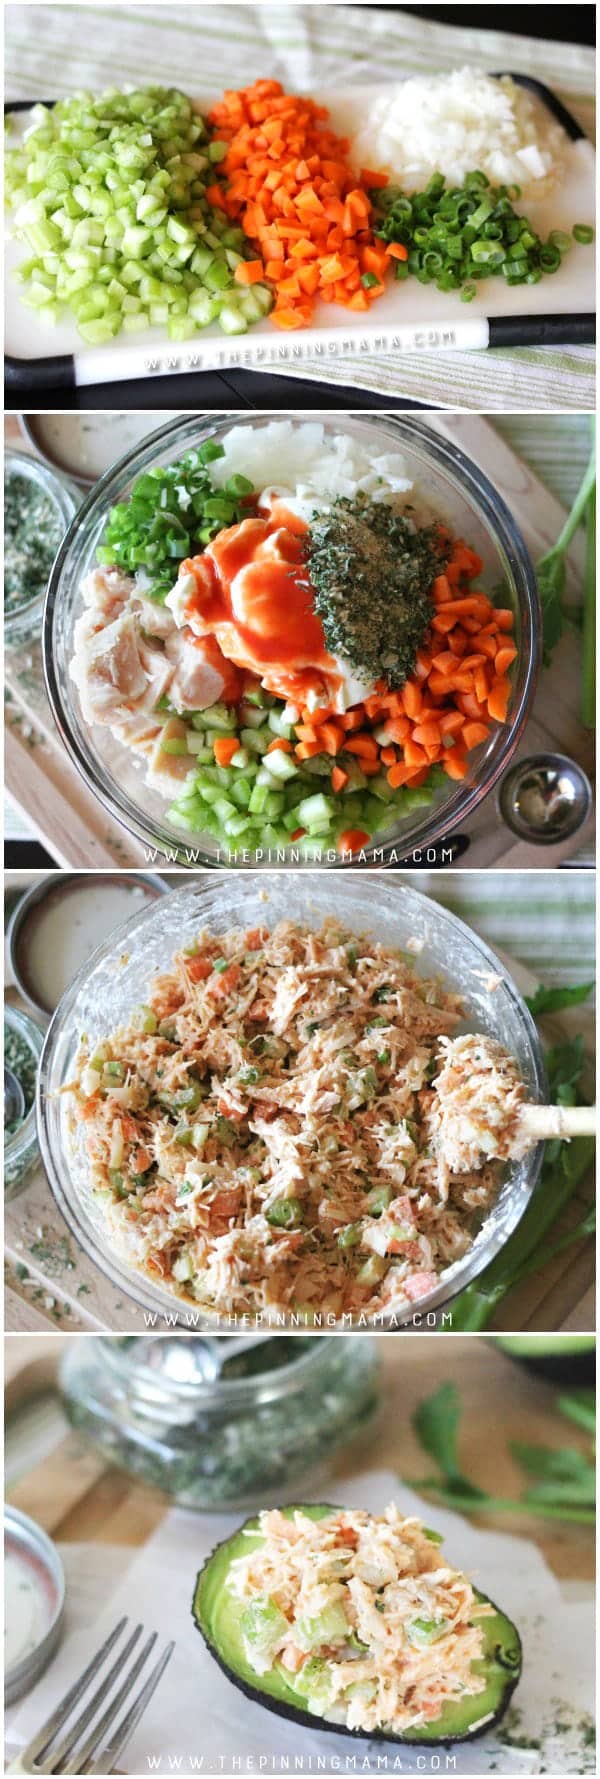 Step by Step how to make Easy Buffalo Ranch Chicken Salad. This easy recipe is so delicious! It is packed with flavors and you can make it as spicy as you want. As a bonus, it is Paleo, Whole30 Compliant, gluten free, dairy free, and just plain tasty whether you are following a special diet or not.